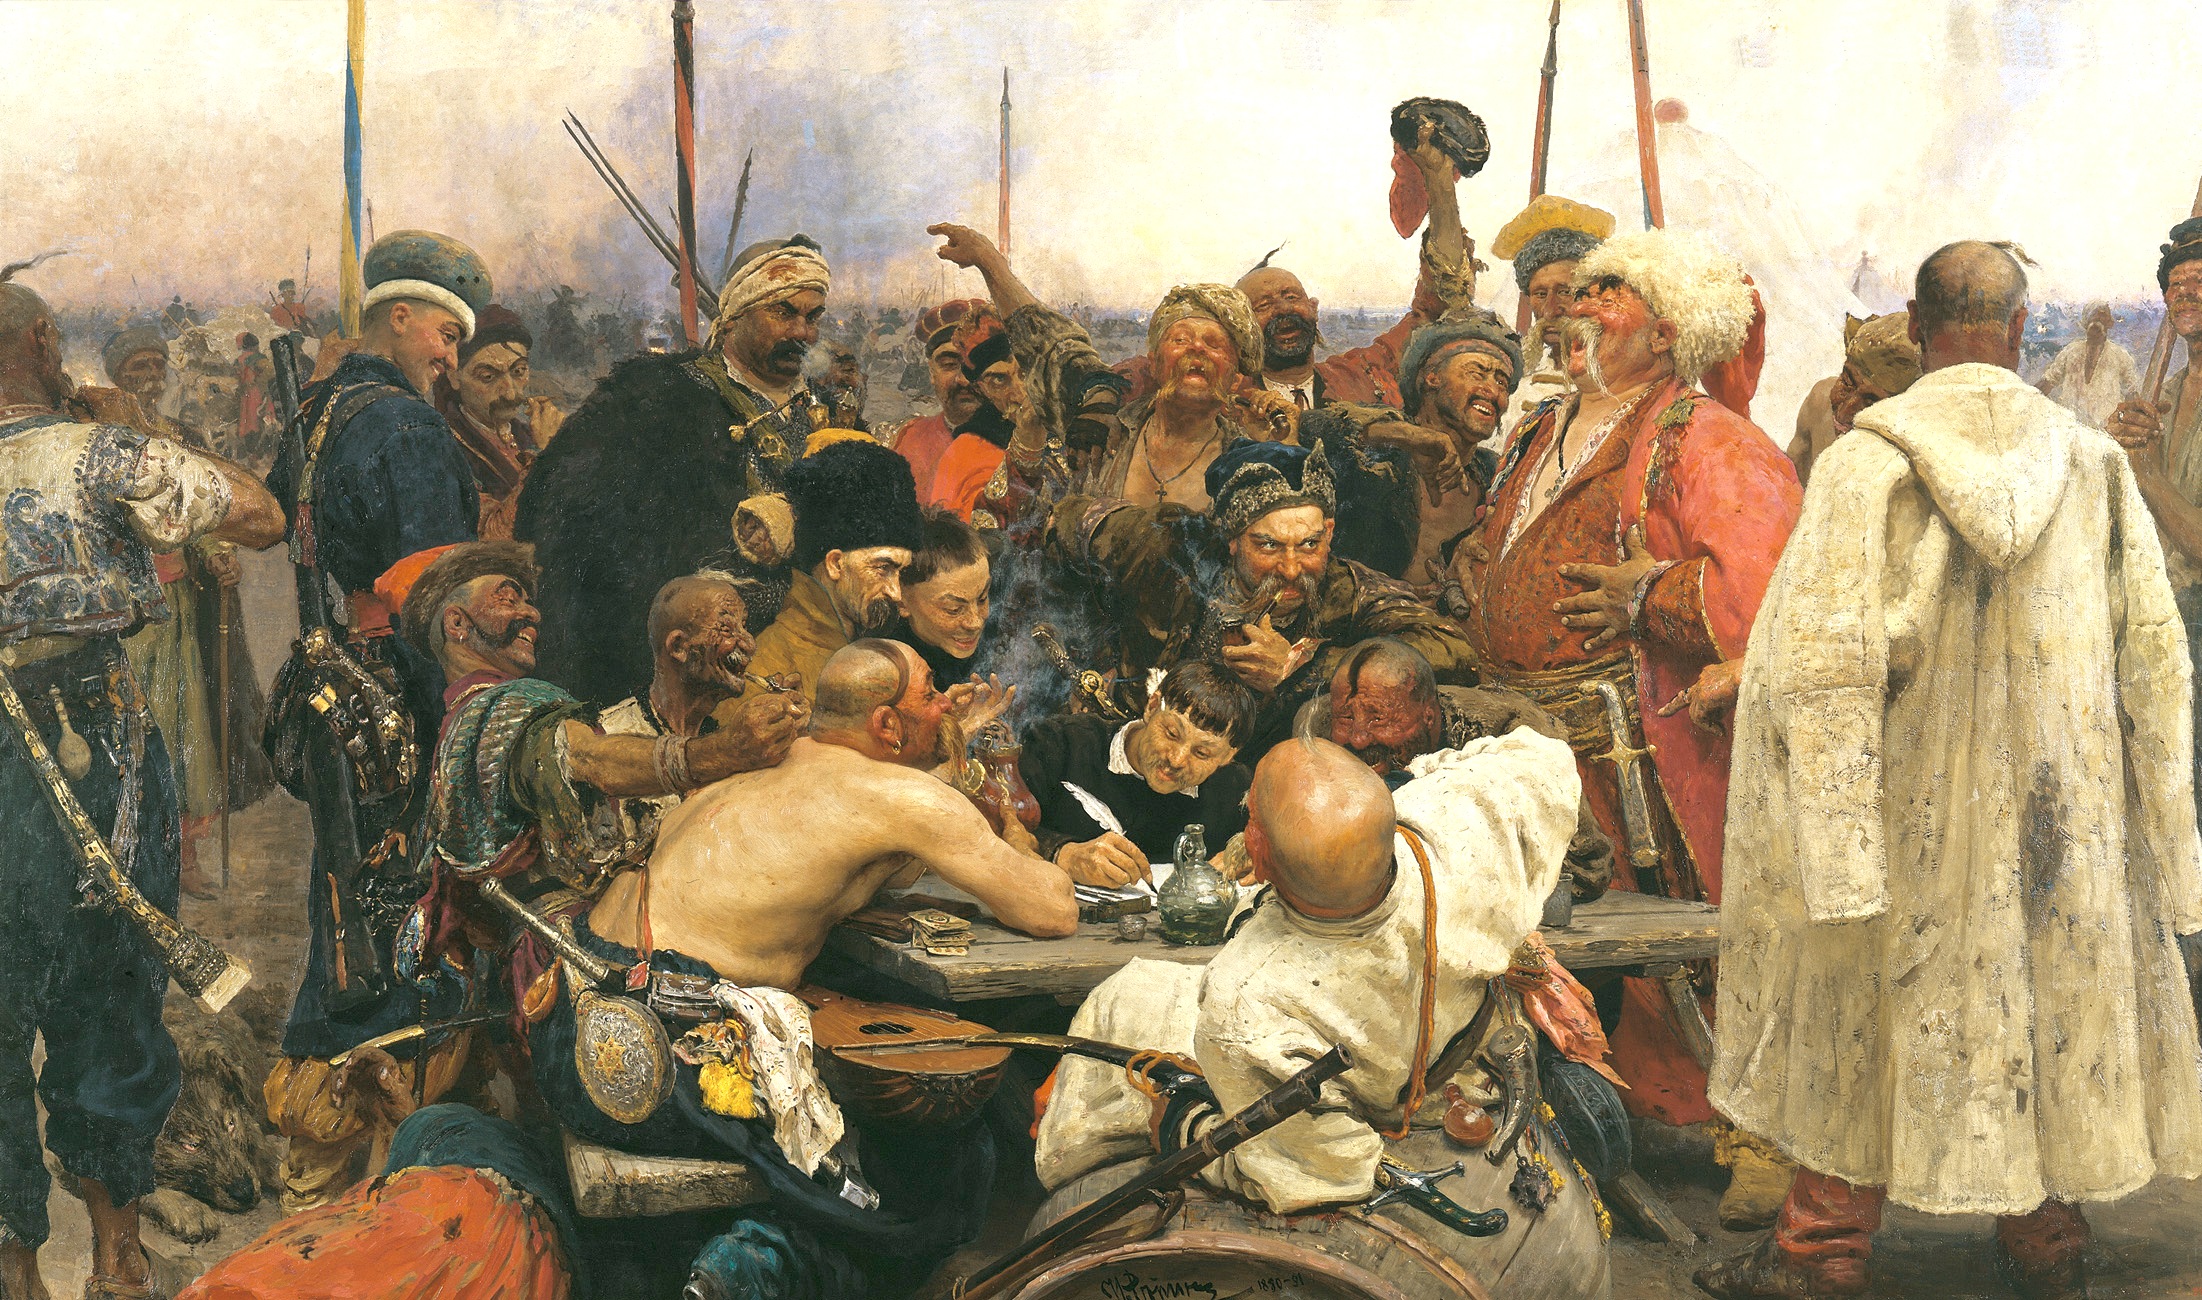  Reply of the Zaporozhian Cossacks to Sultan Mehmed IV of the Ottoman Empire, Repin